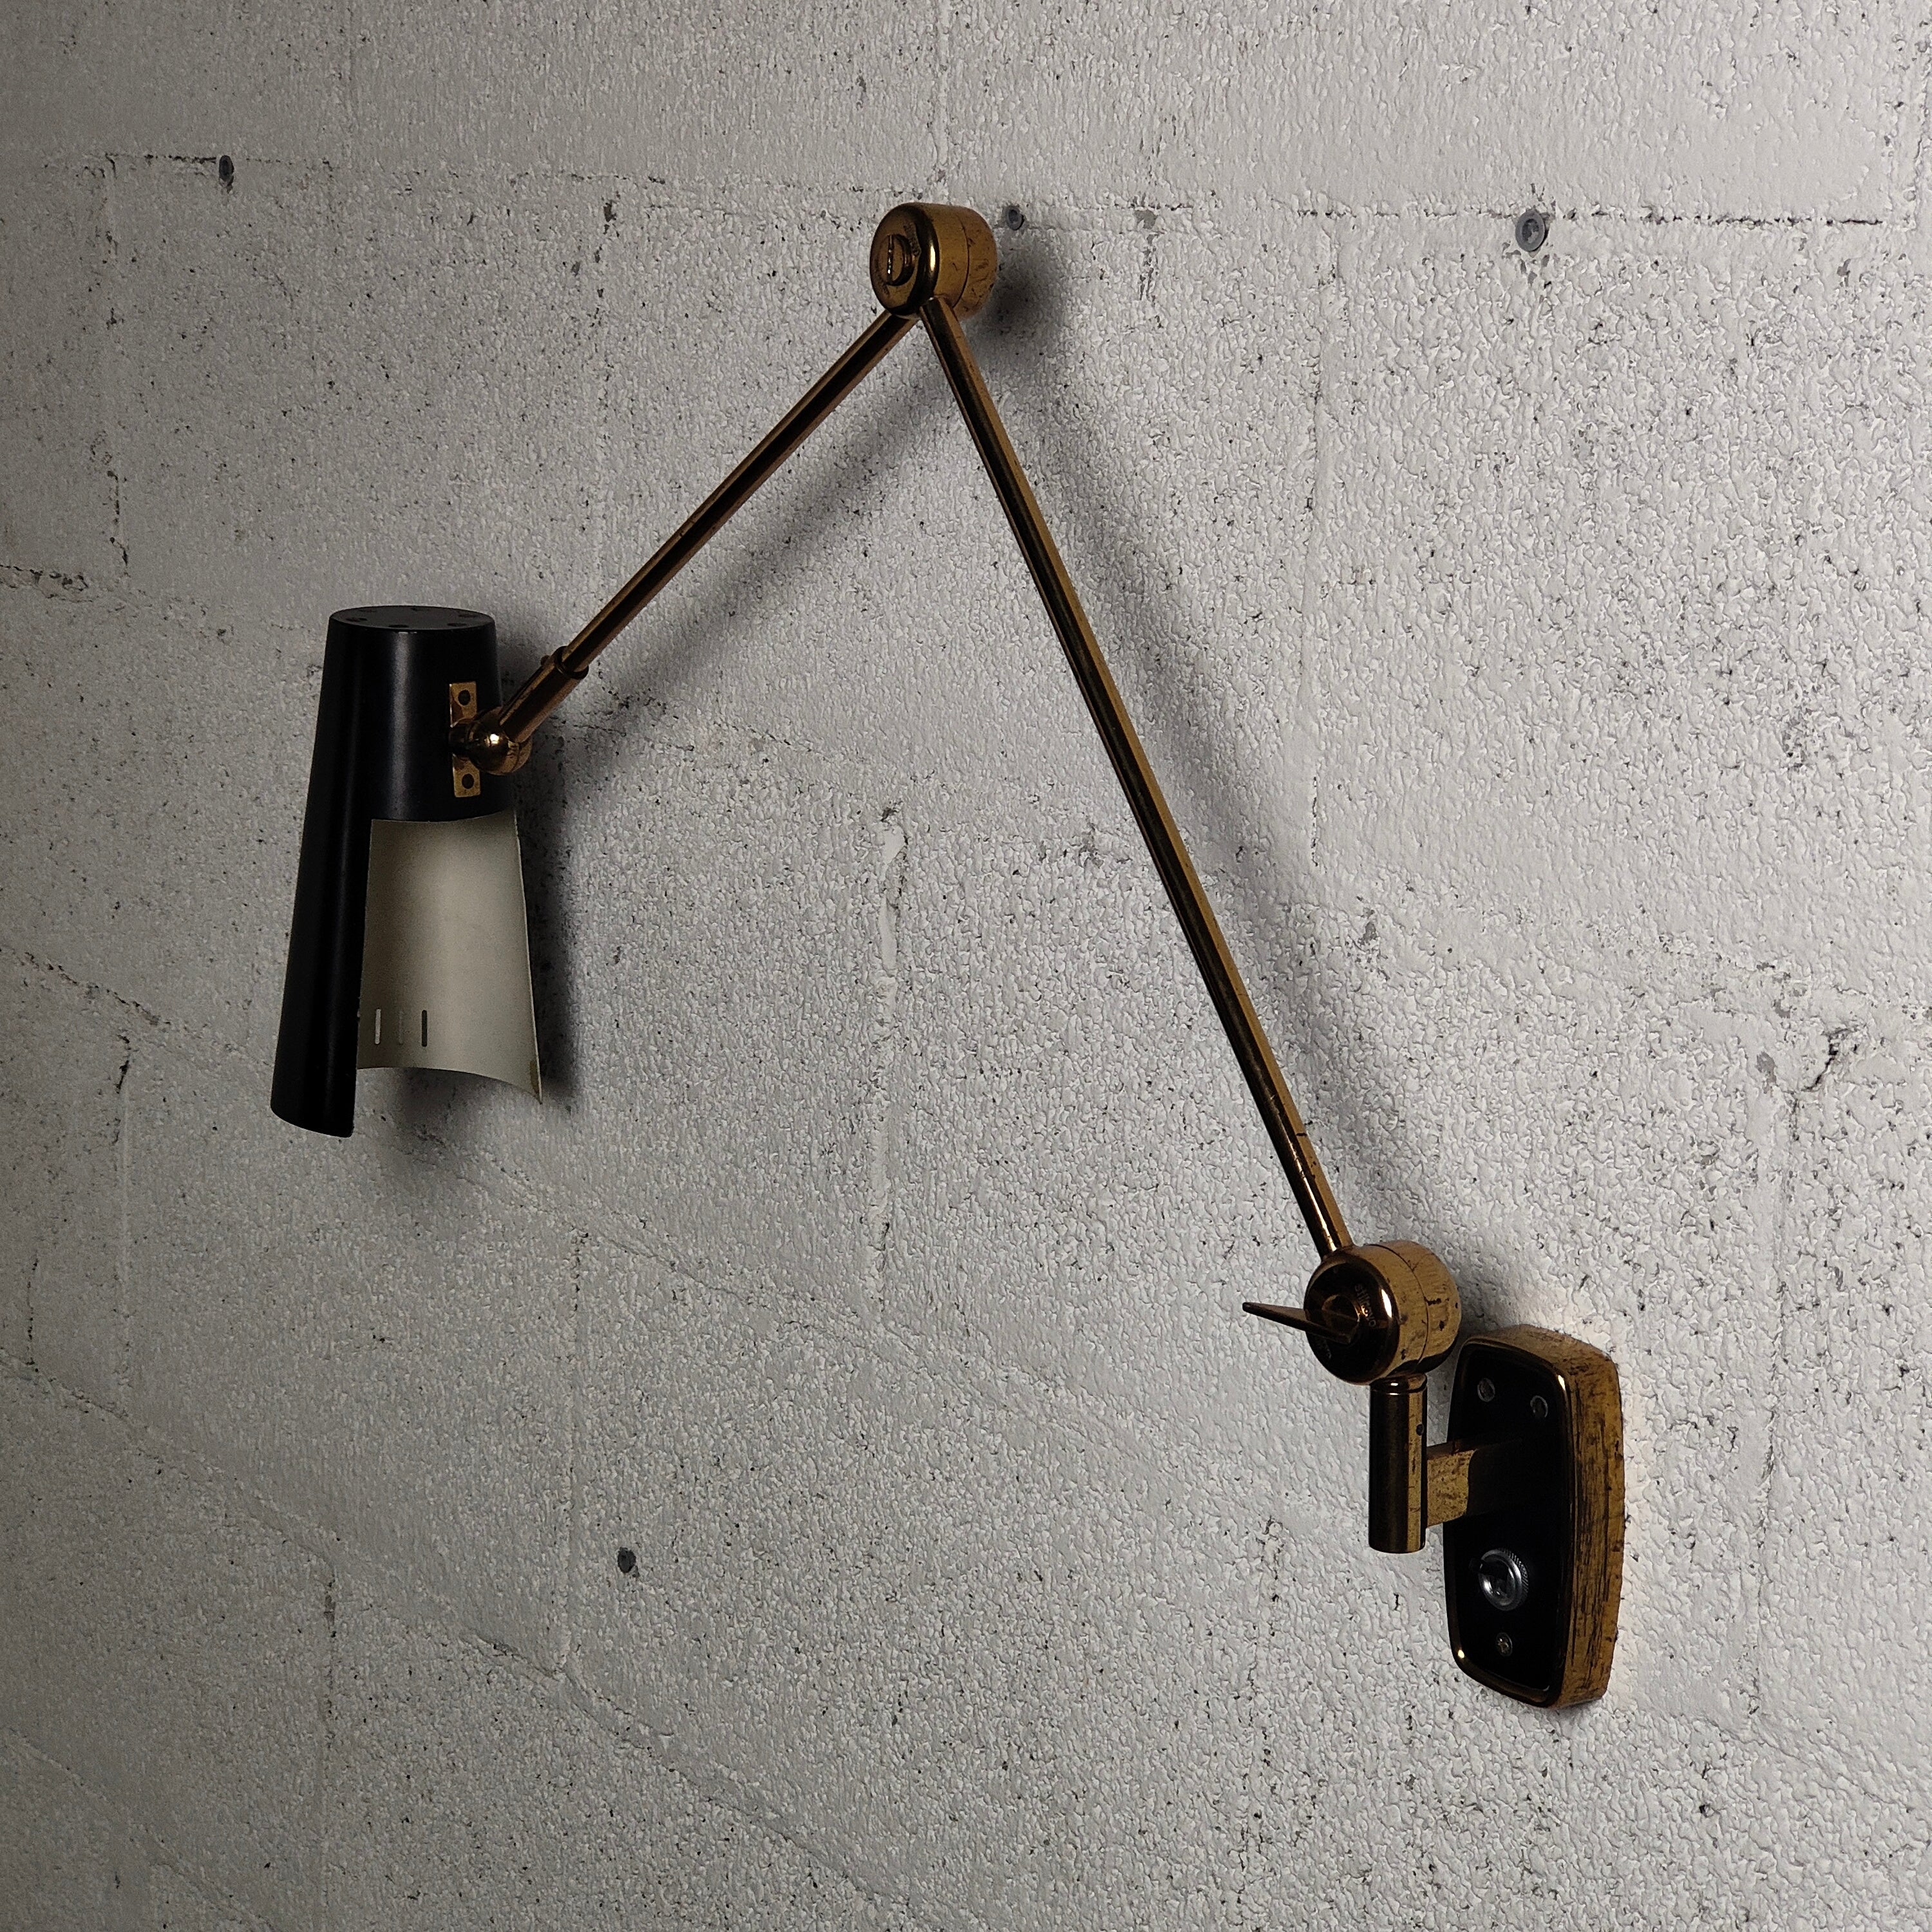 Stilnovo articulating wall light model 2024 with black enameled perforated metal shades on brass arms, Italy, 1960s. 
The metal shades pivot from ball joints and the articulating arms are adjustable from butterfly keys. 
Beautifully designed and